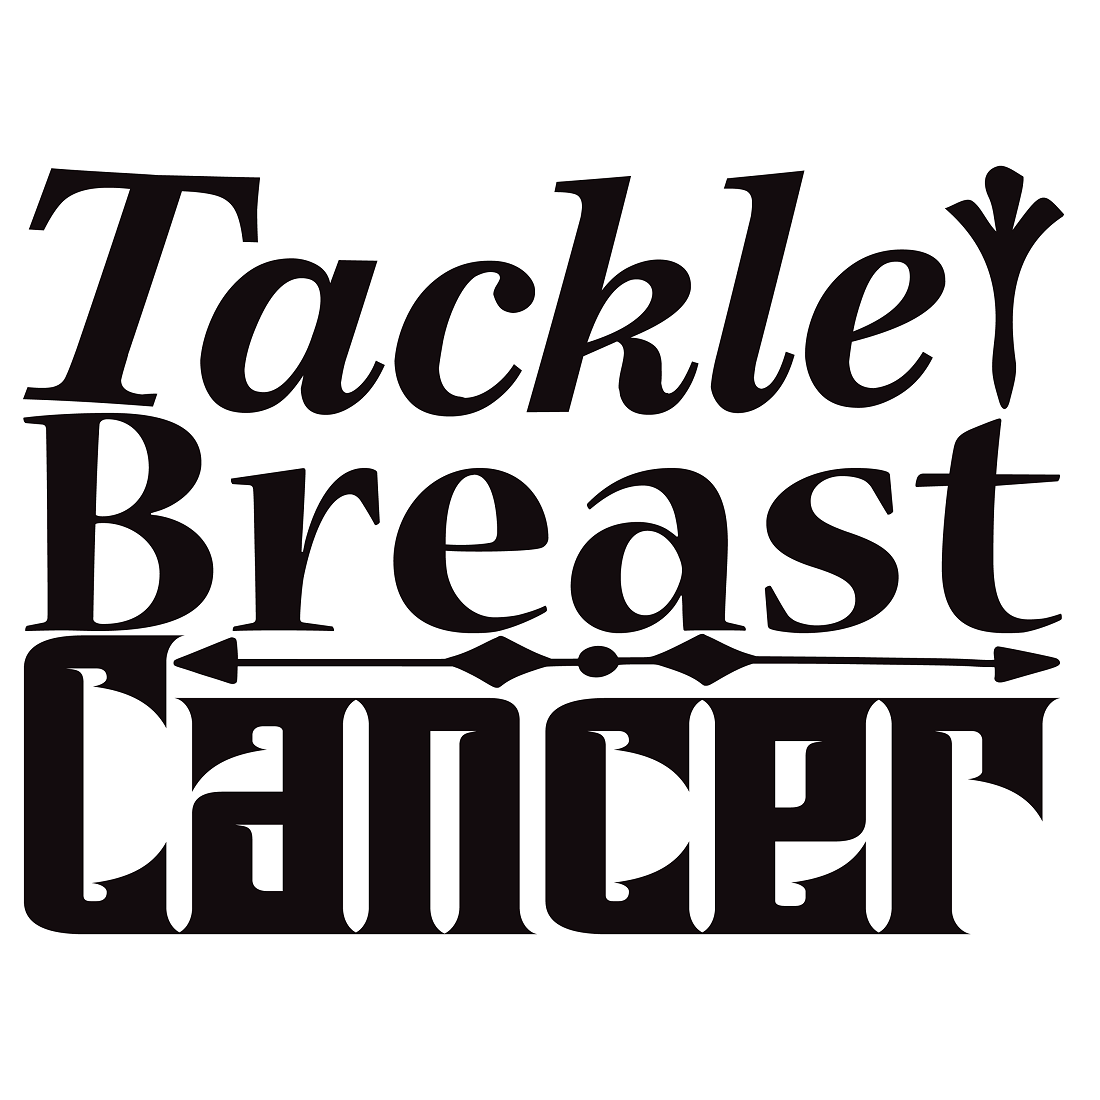 Tackle breast cancer preview image.